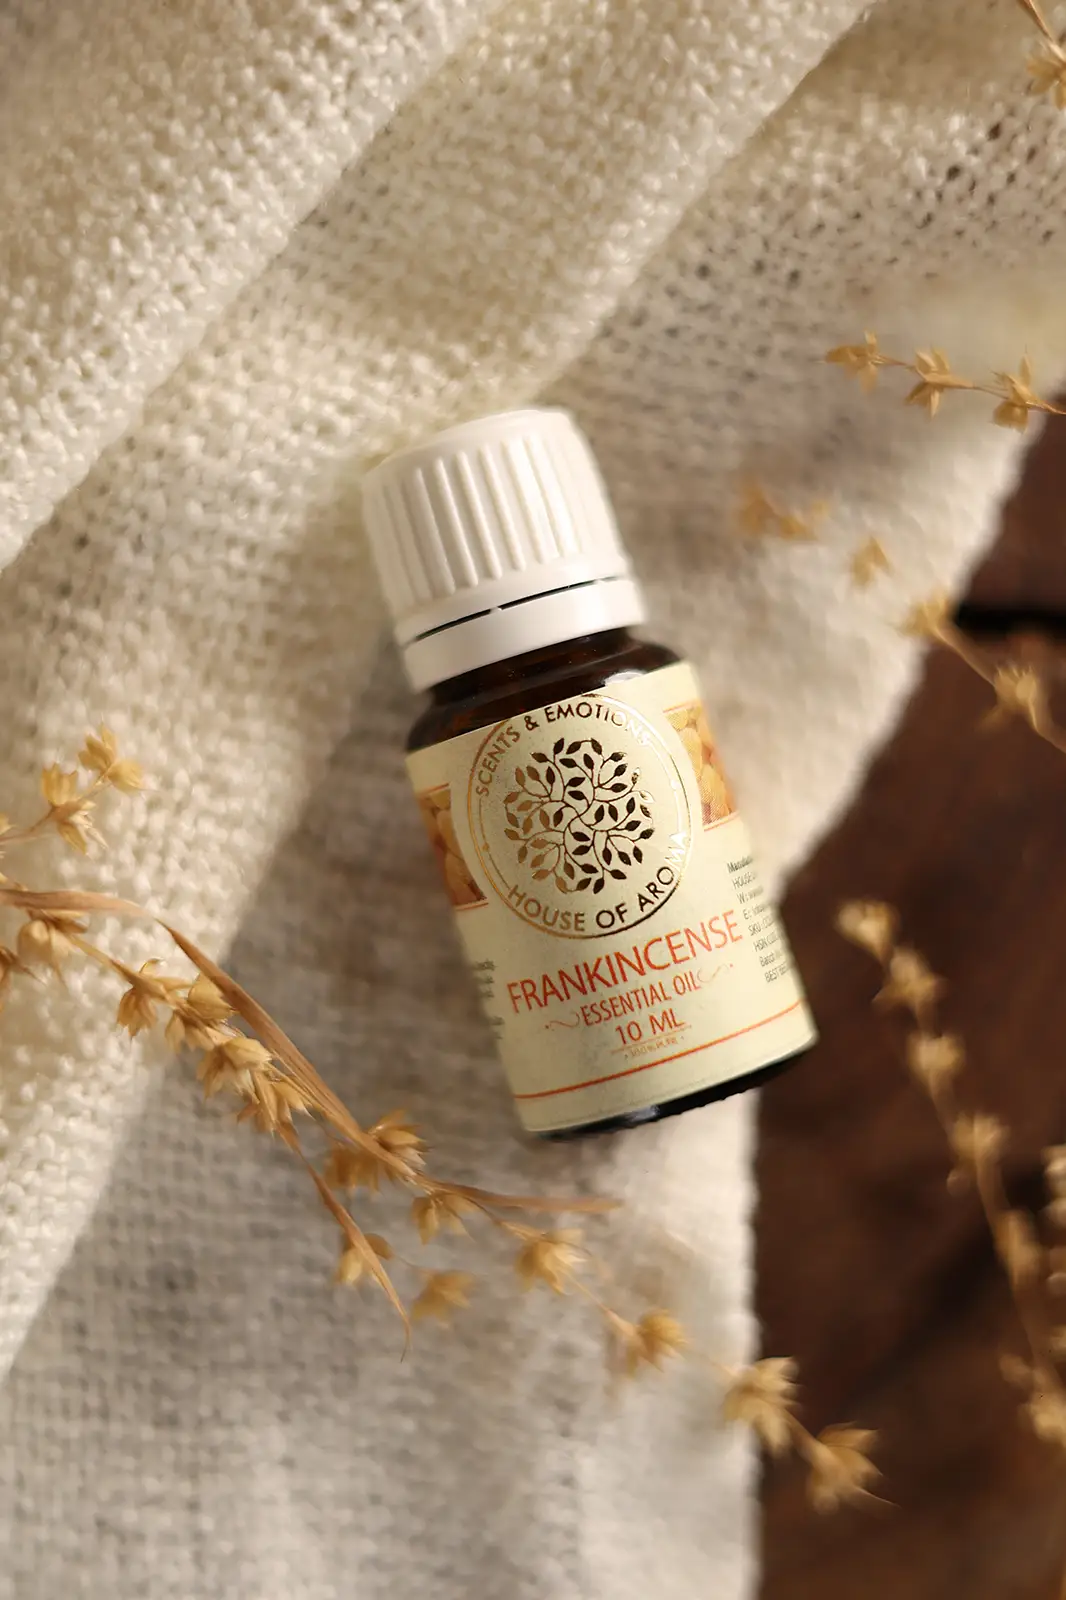 Benefits of frankincense essential oil, Best essential oil brands candle making, Frankincense essential oil aromatherapy benefits, woody scent, House Of Aroma